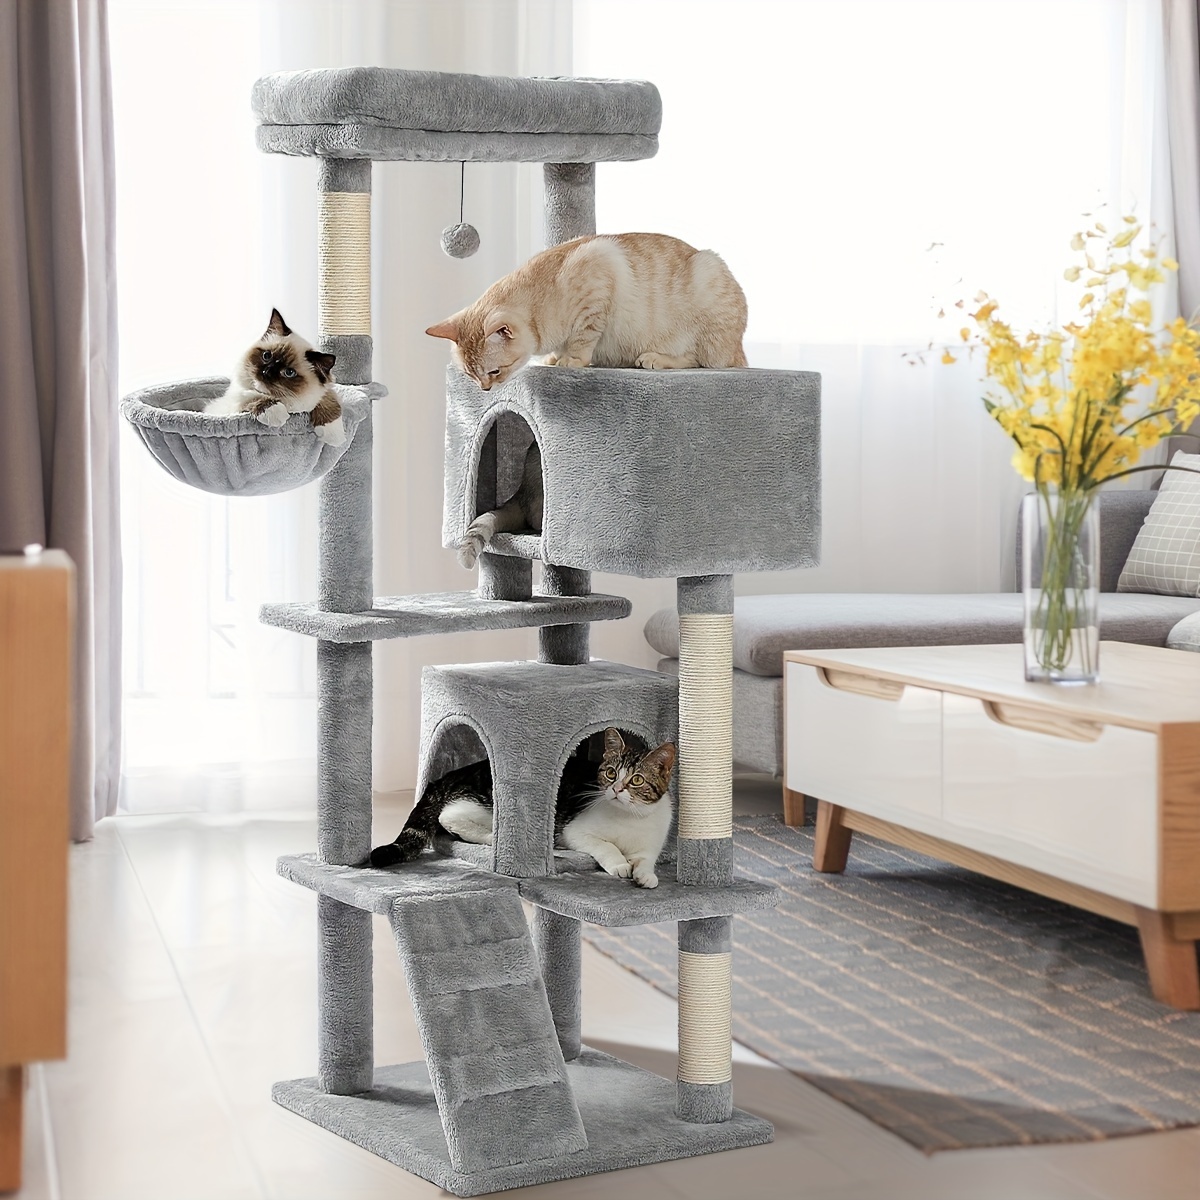 

Cat Tree For Large Cats Adult With Super Large Top Perch, 56.3" Cat Tower For Large Cats With Plush Hammock, Cat Shelves And Dangling Pompom, Cat Scratching Posts And 2 Condos Houses, Grey